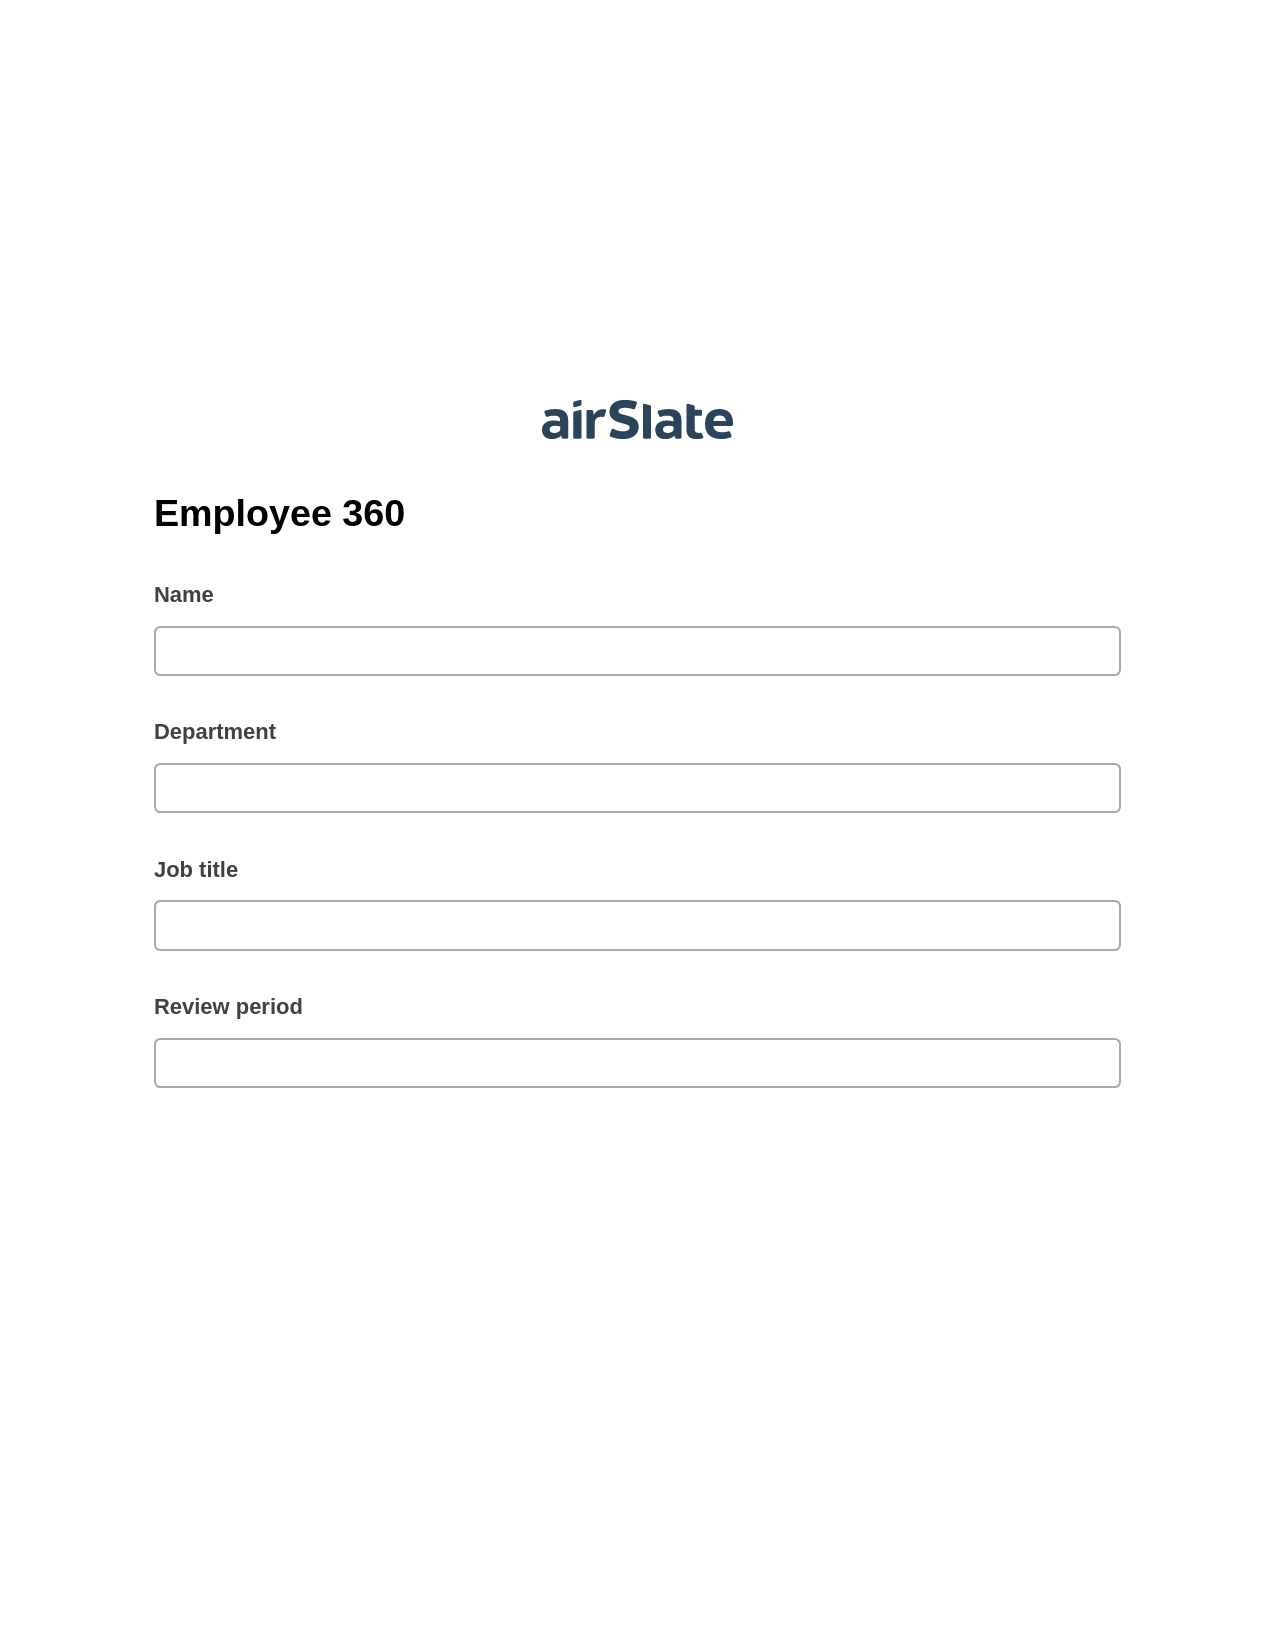 Employee 360 Pre-fill from CSV File Bot, Google Cloud Print Bot, Export to Excel 365 Bot